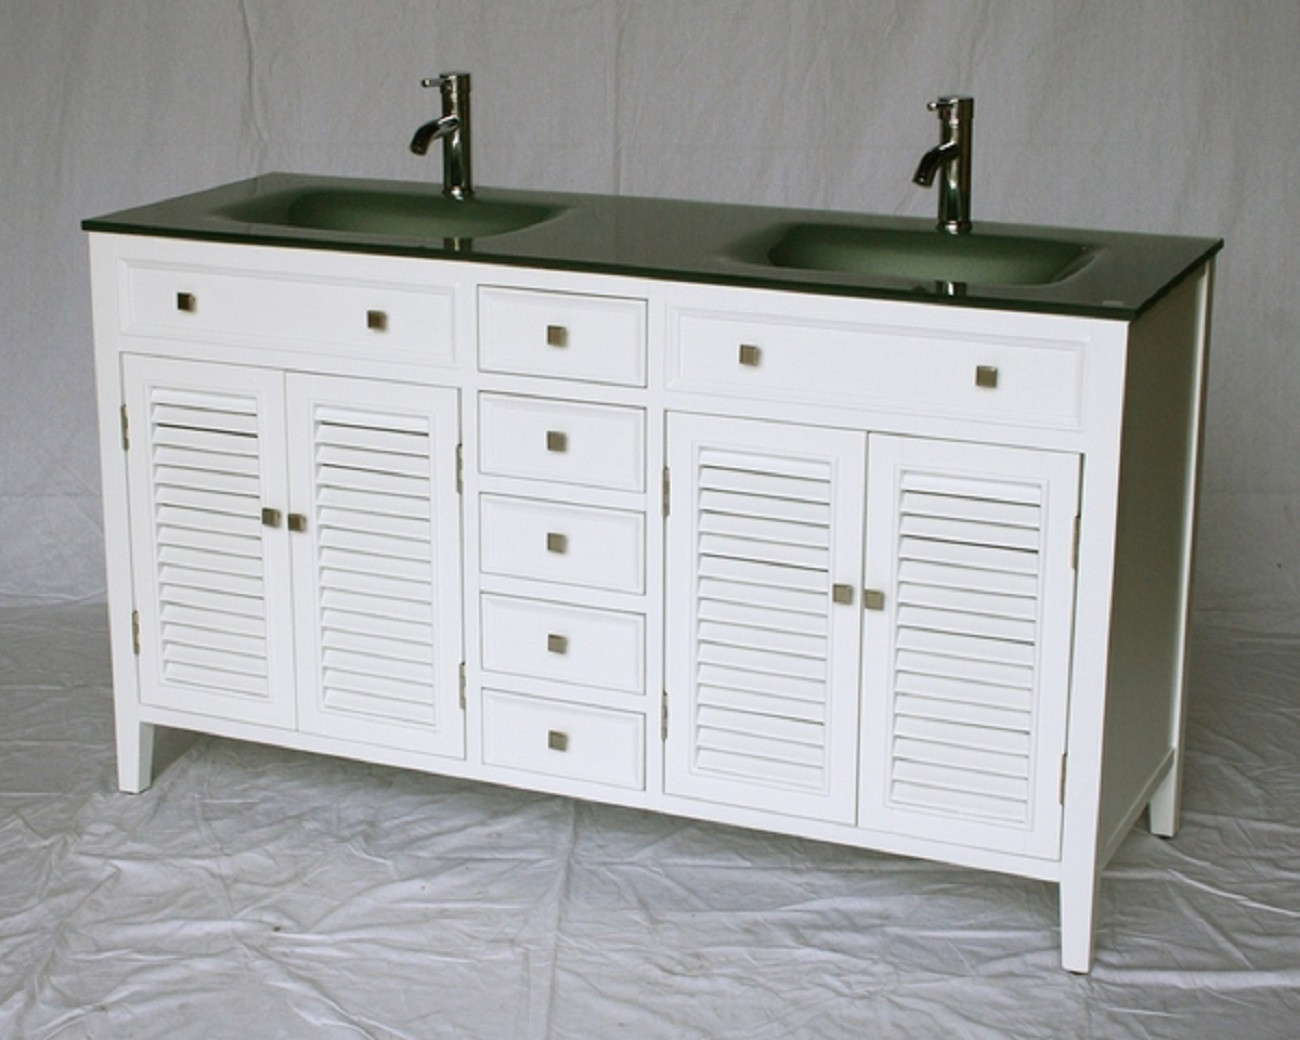 60 Inch White Bathroom Vanity
 60 inch Bathroom Vanity Cottage Style White Cabinet Glass Top